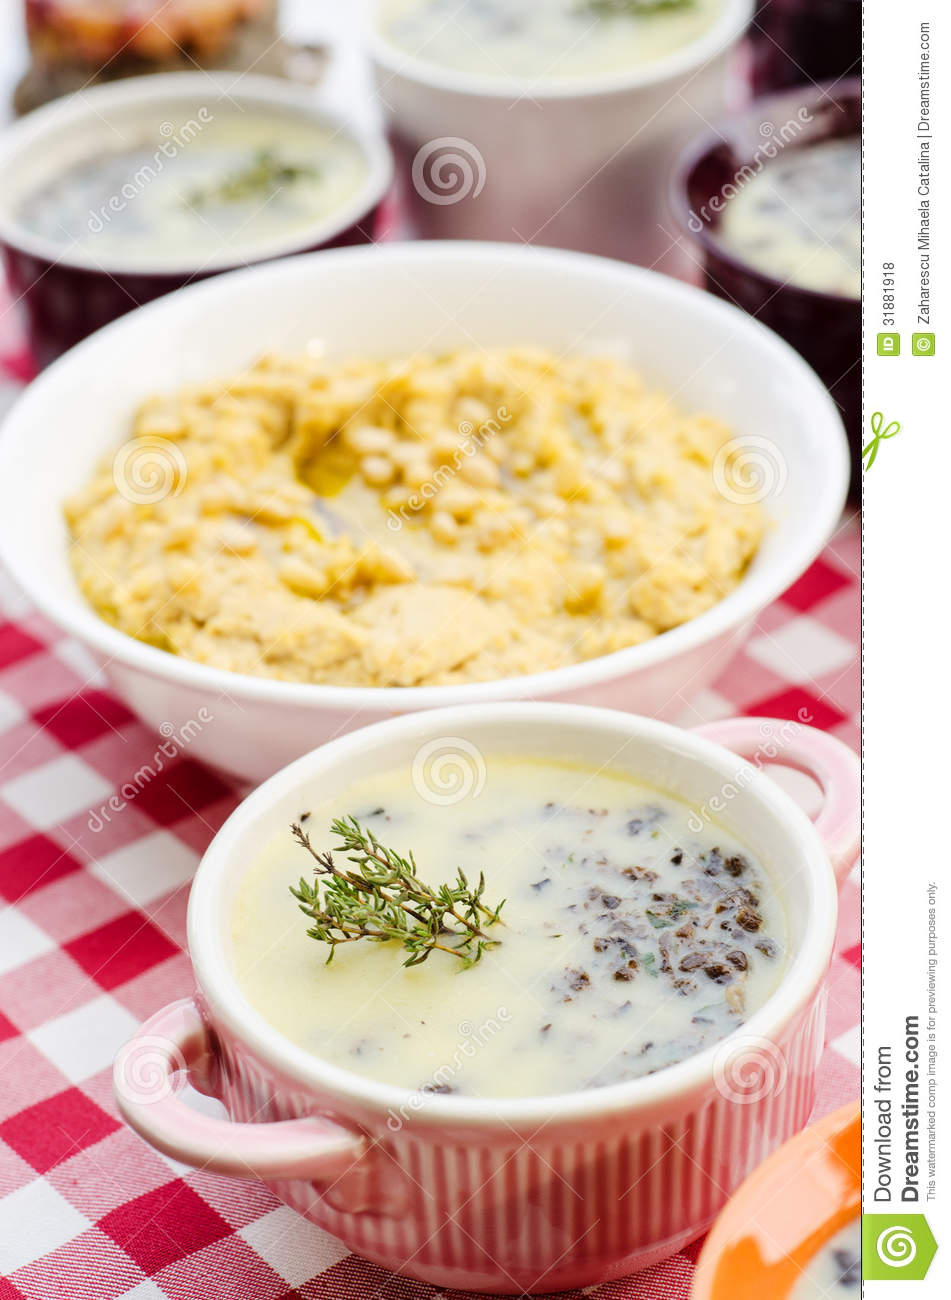 Spreads And Dips Royalty Free Stock Photos   Image  31881918